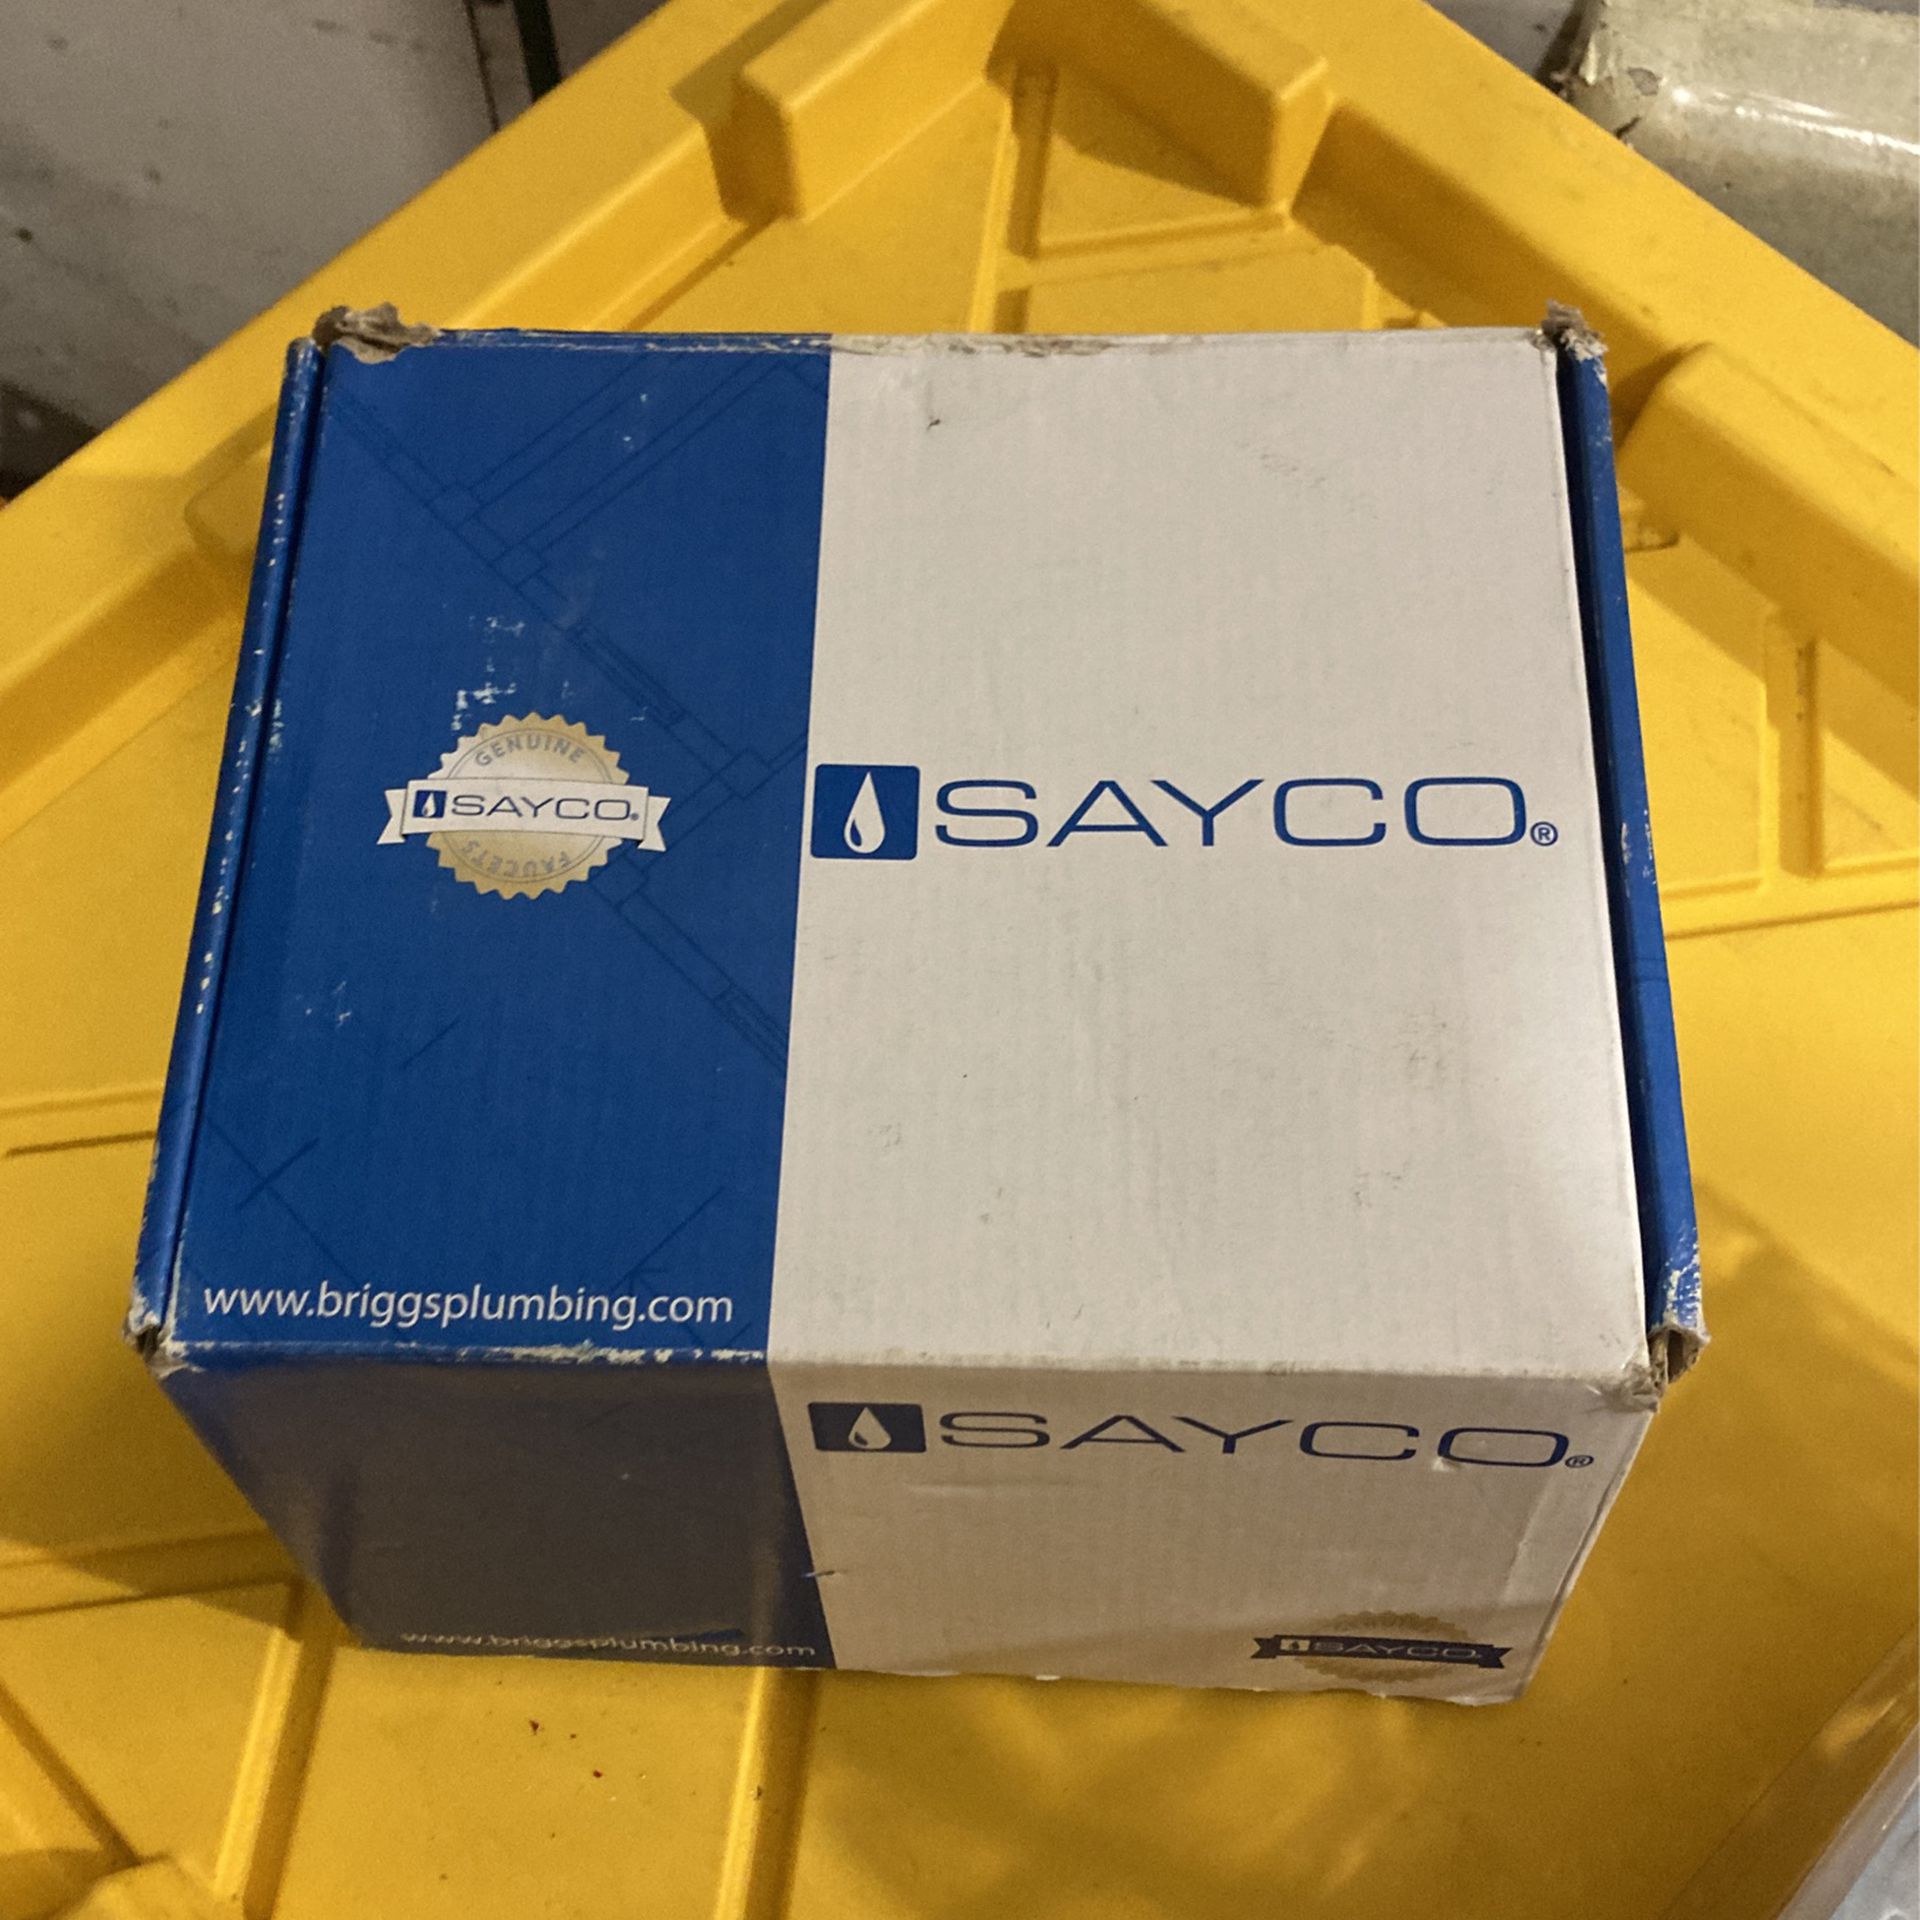 SAYCO S400 BATH FAUCET NEW IN BOX